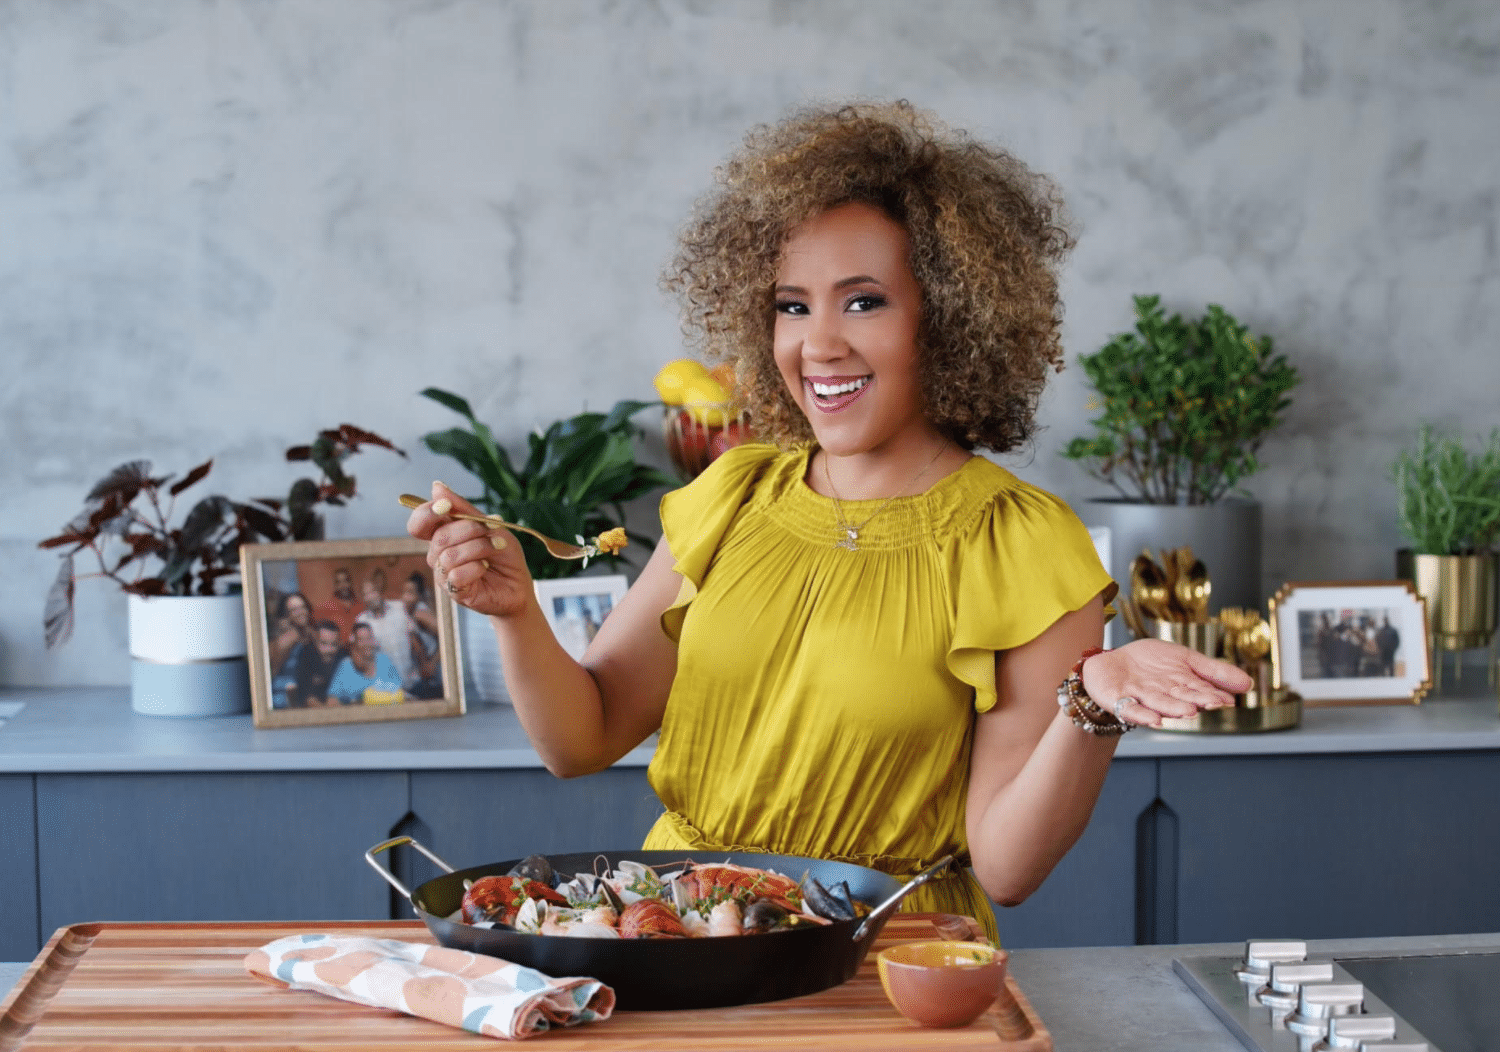 Bren Herrera is First Afro-Latina to Host Cooking Series on U.S. Network